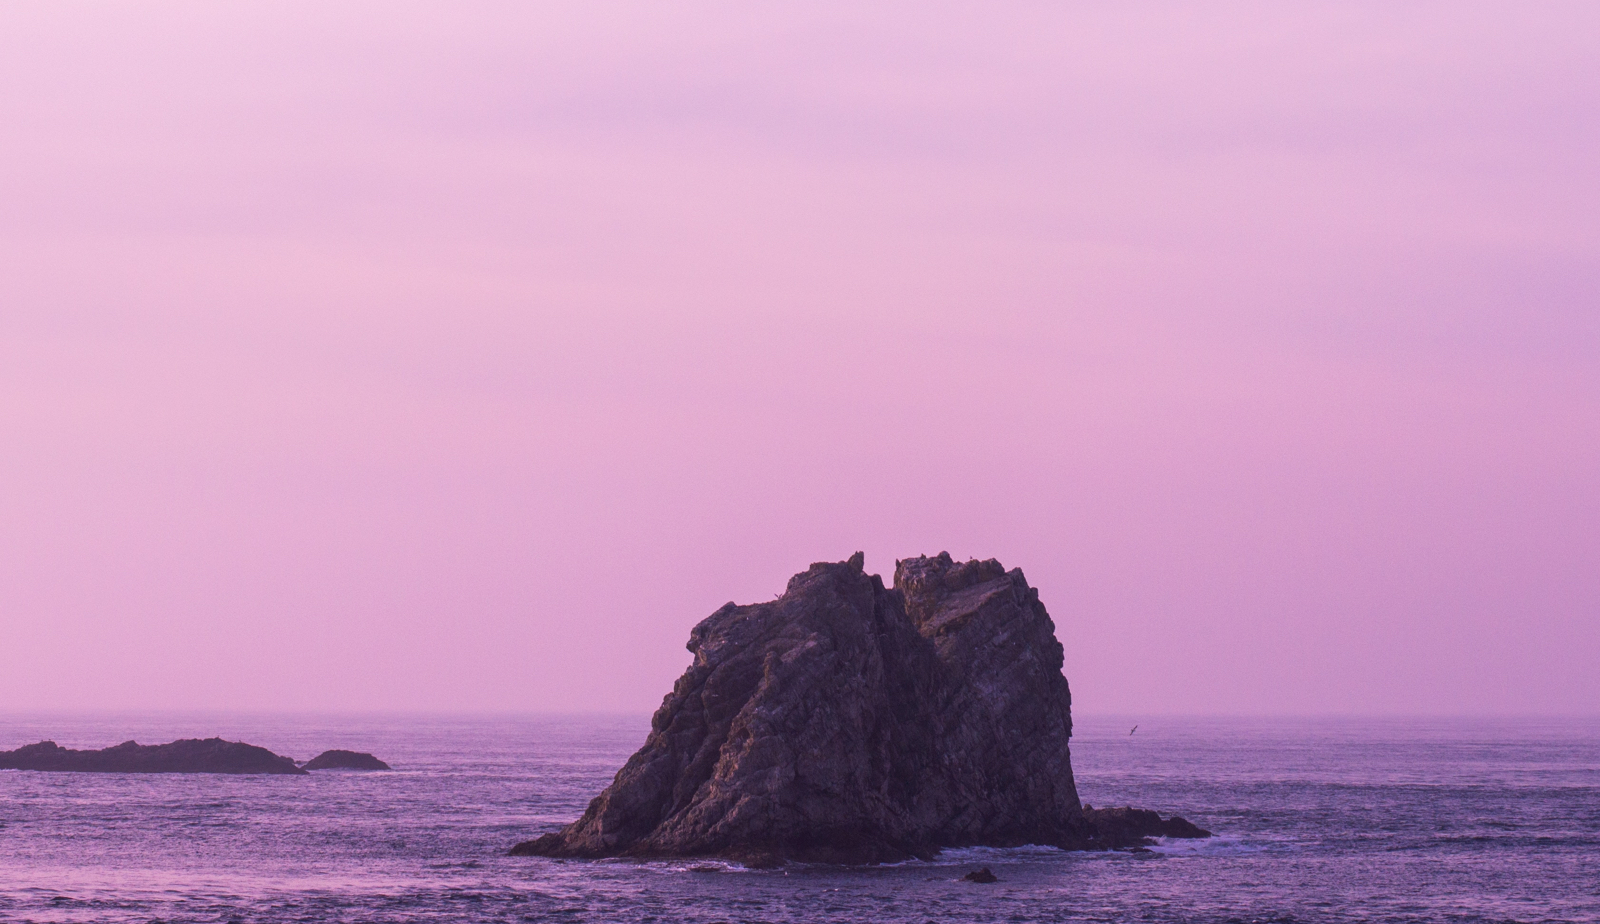 Giant rock against a pink sunset